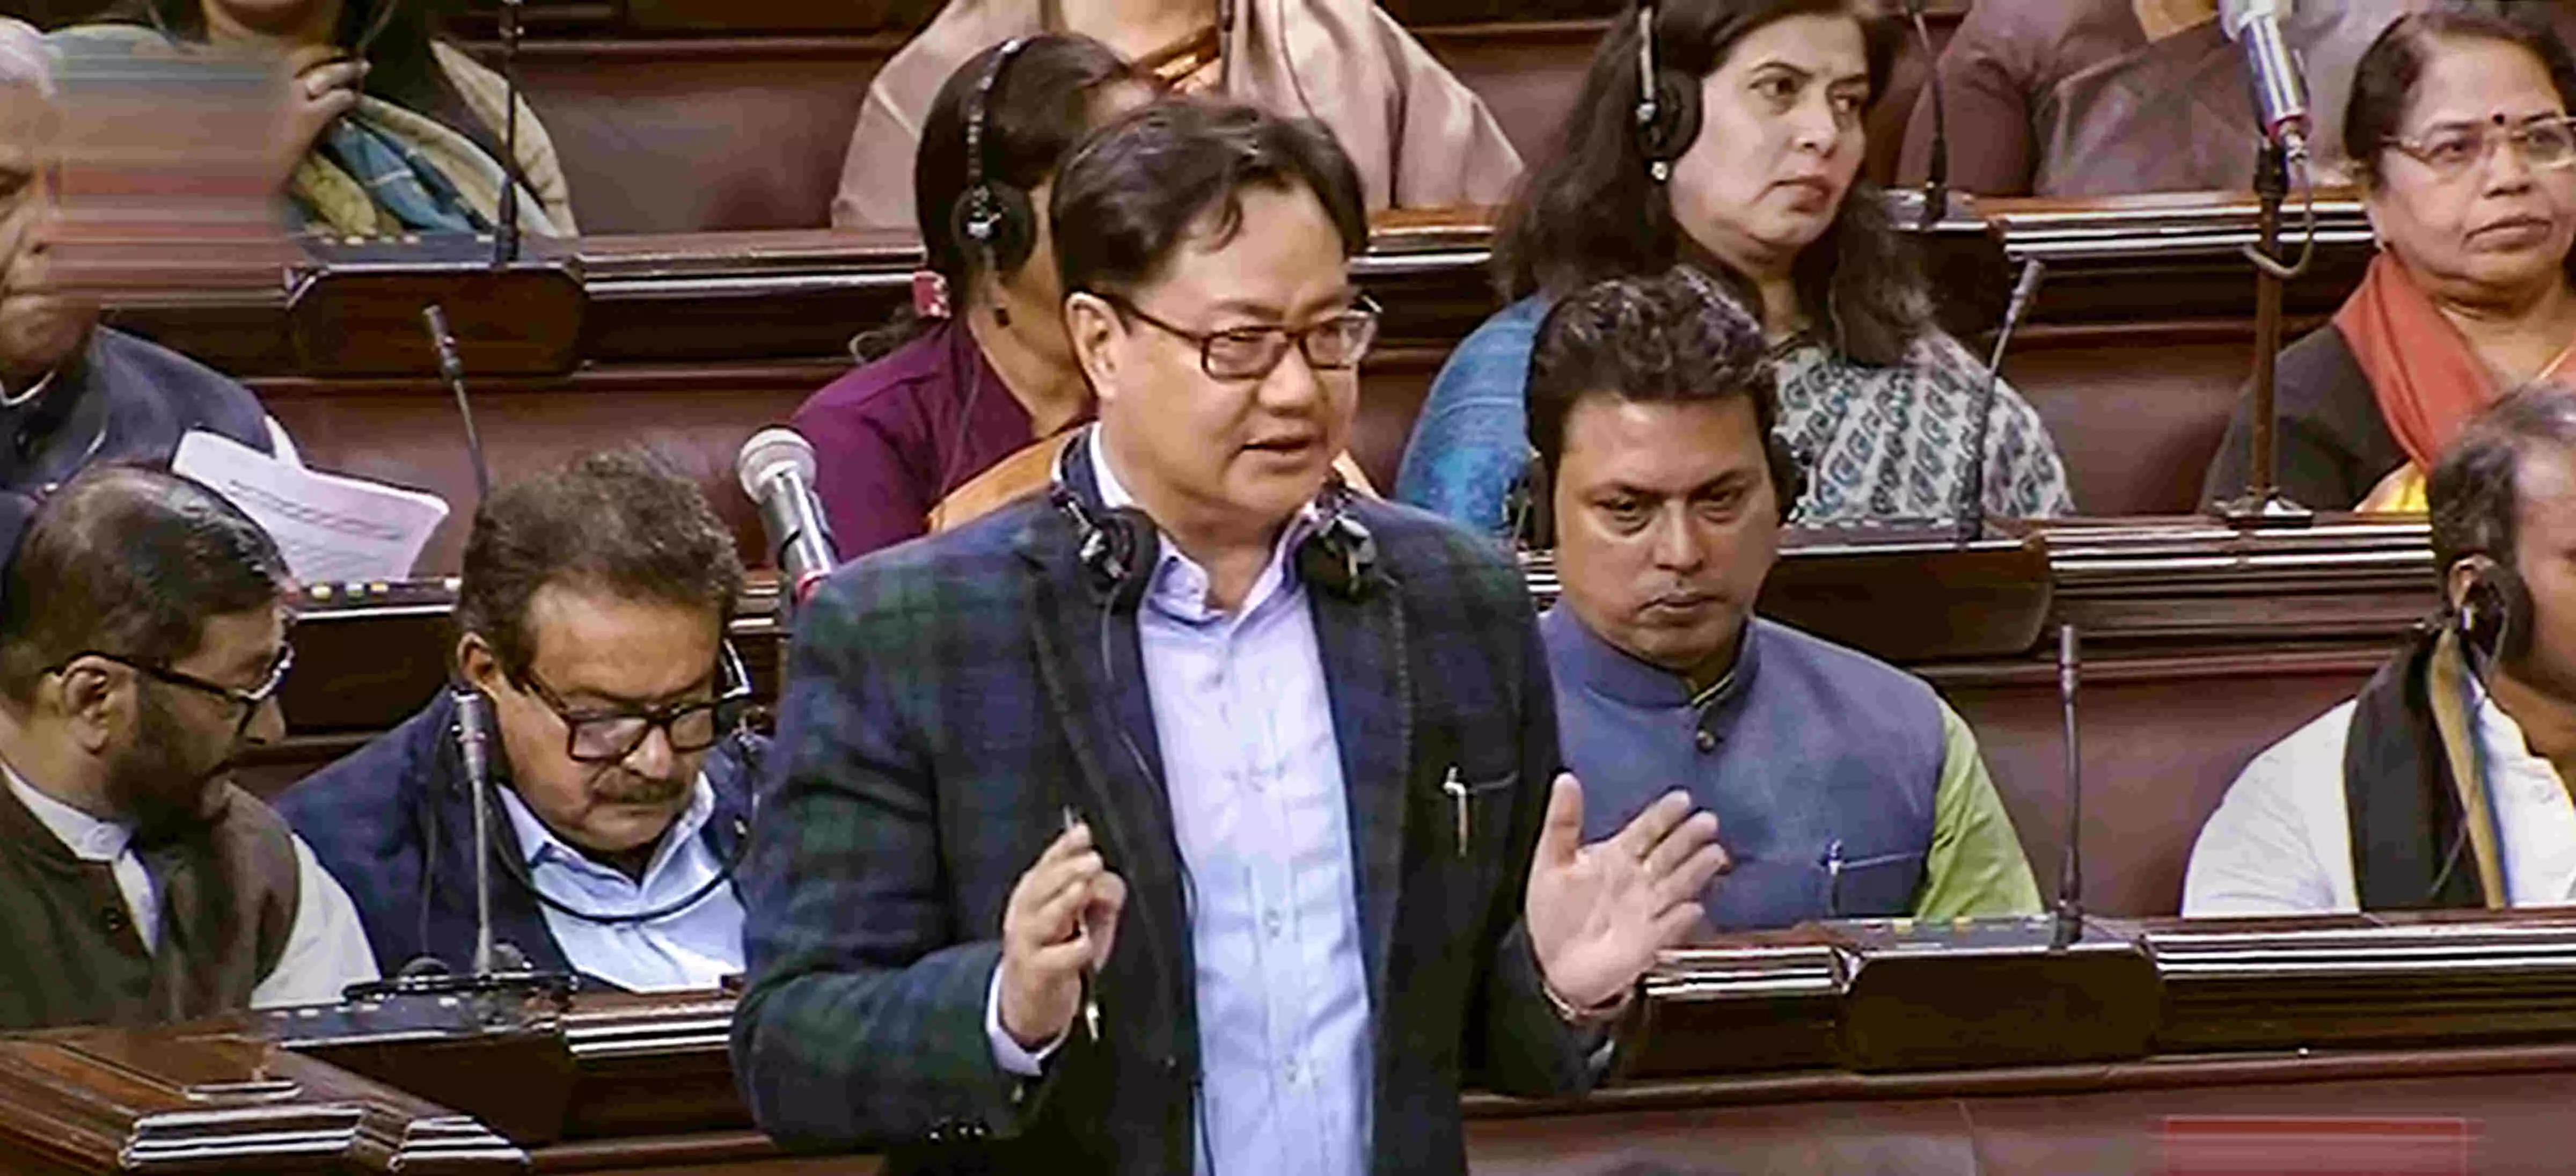 Issue Of Vacancies In Higher Judiciary Will Linger Till New System Put In Place: Rijiju